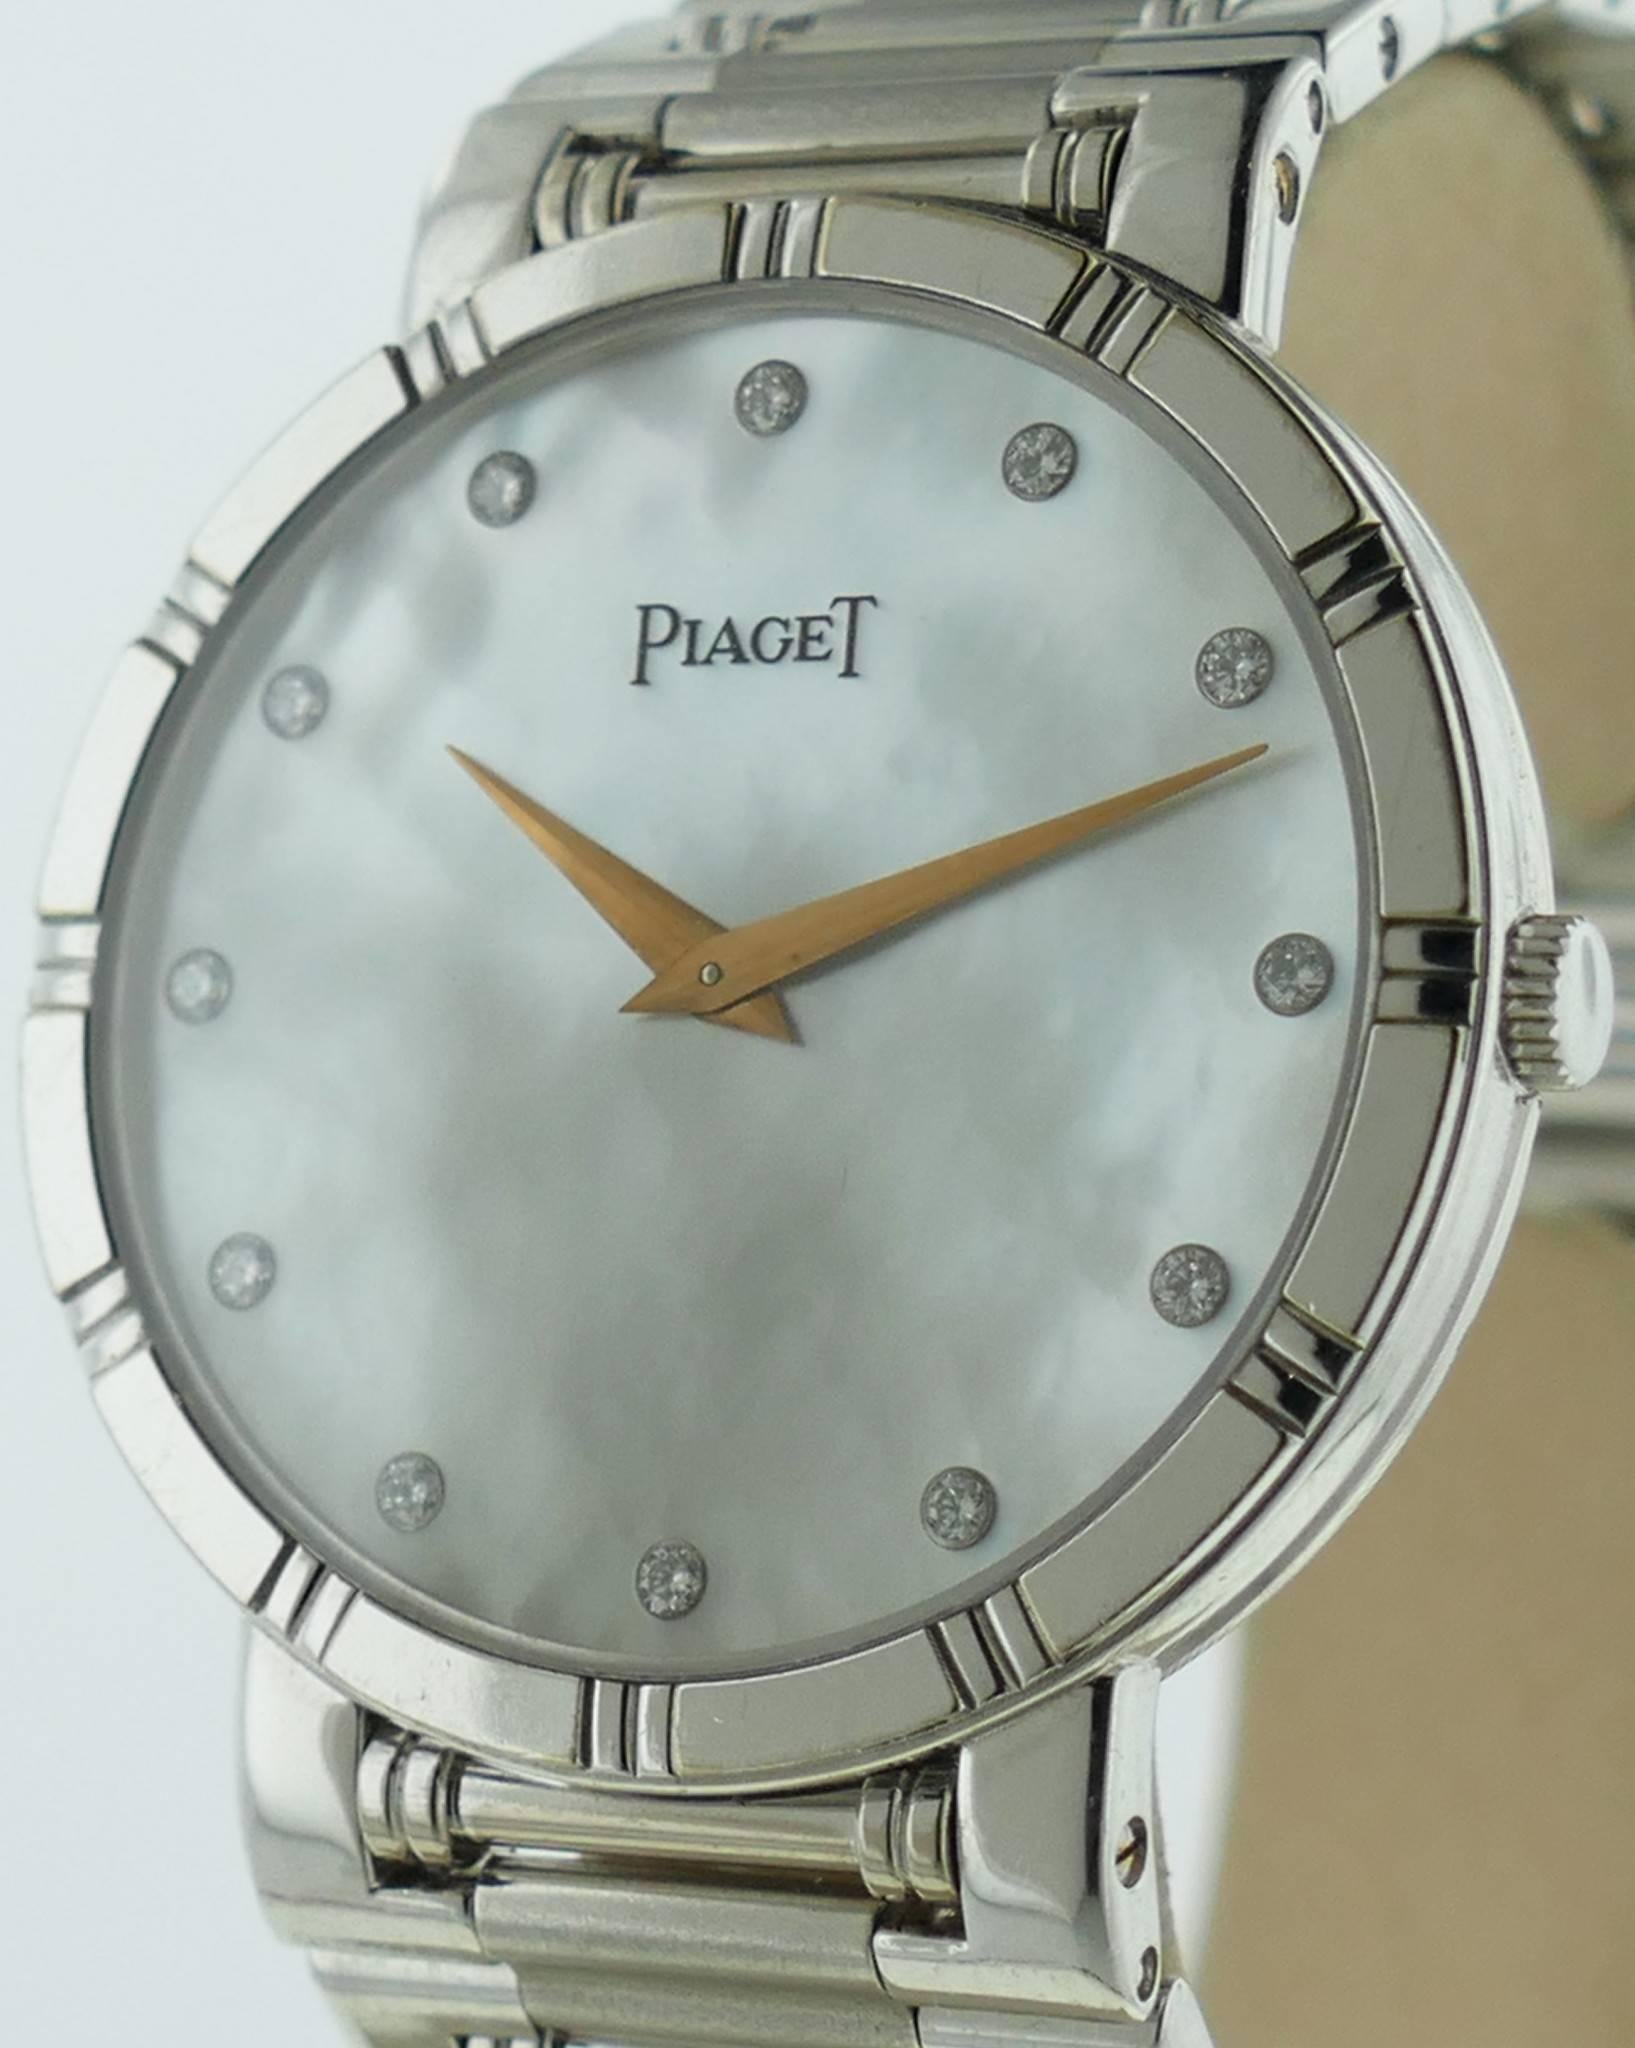 Ladies (31mm) Piaget Dancer 18k White Gold Mother Of Pearl Diamond Dial Watch. The Watch is in Great Condition & Keeping Great Time; Movement is Battery Operated. The Watch fits up to a appx 6 3/4 Inch Wrist. No box or papers. The Watch is